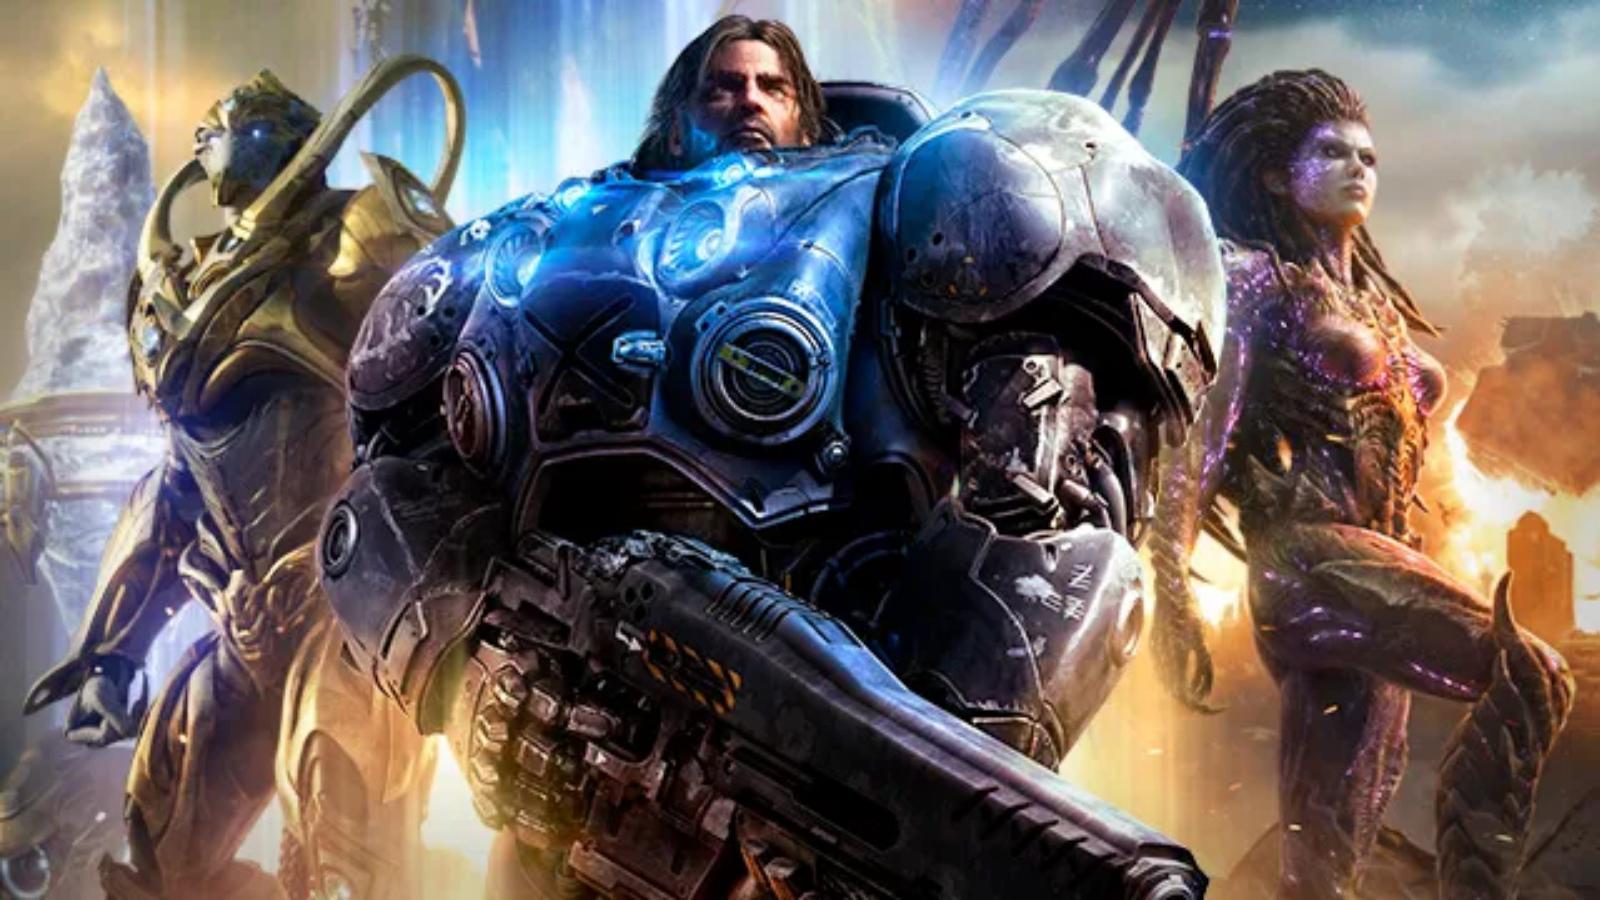 starcraft 2 characters with reynor and kerrigan